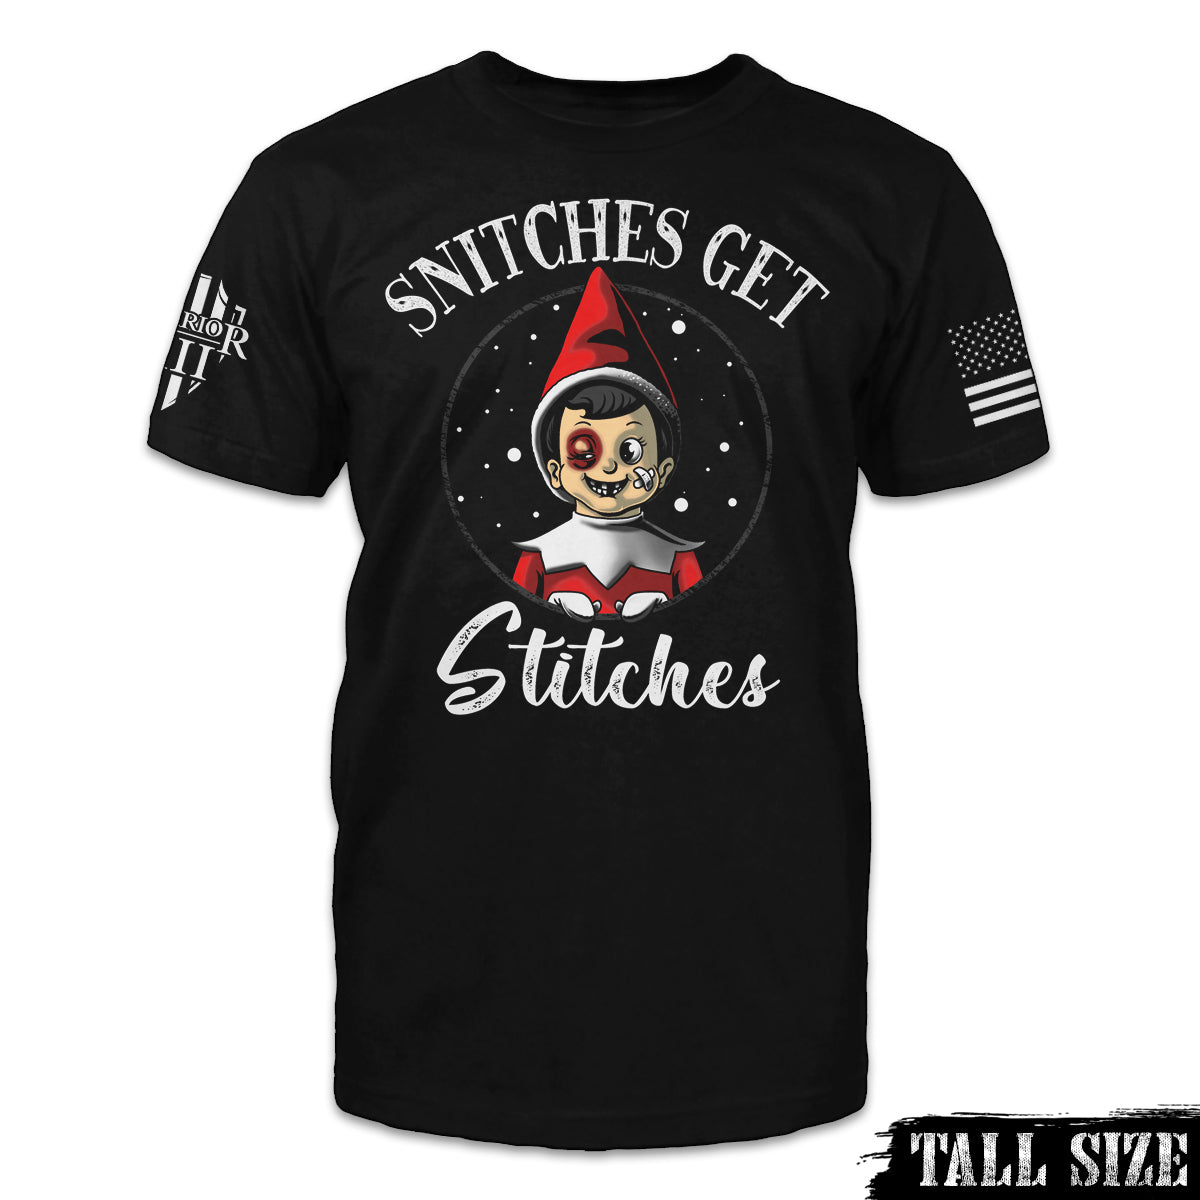 A black tall size shirt with the words "Snitches get stitches" with a beaten up elf on the shelf printed on the front of the shirt.